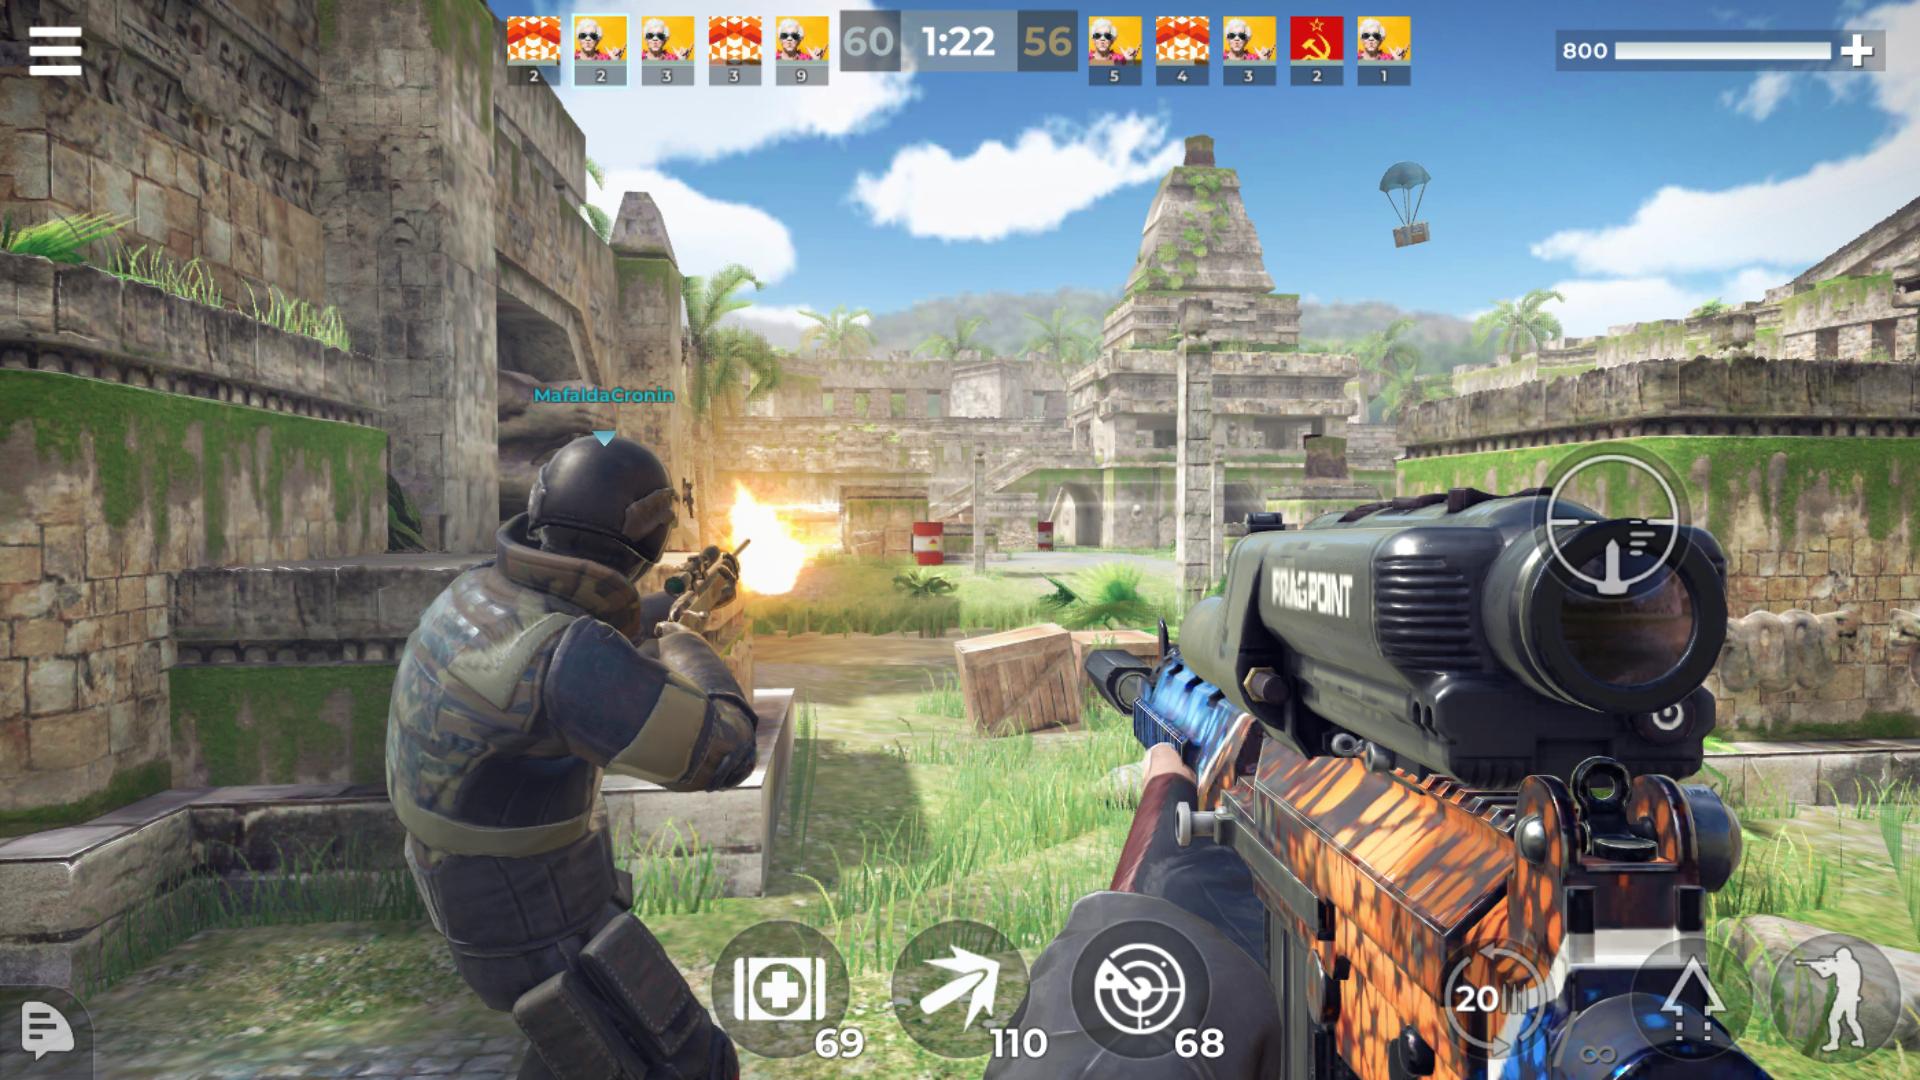 Awp Mode Elite Online 3d Sniper Action For Android Apk Download